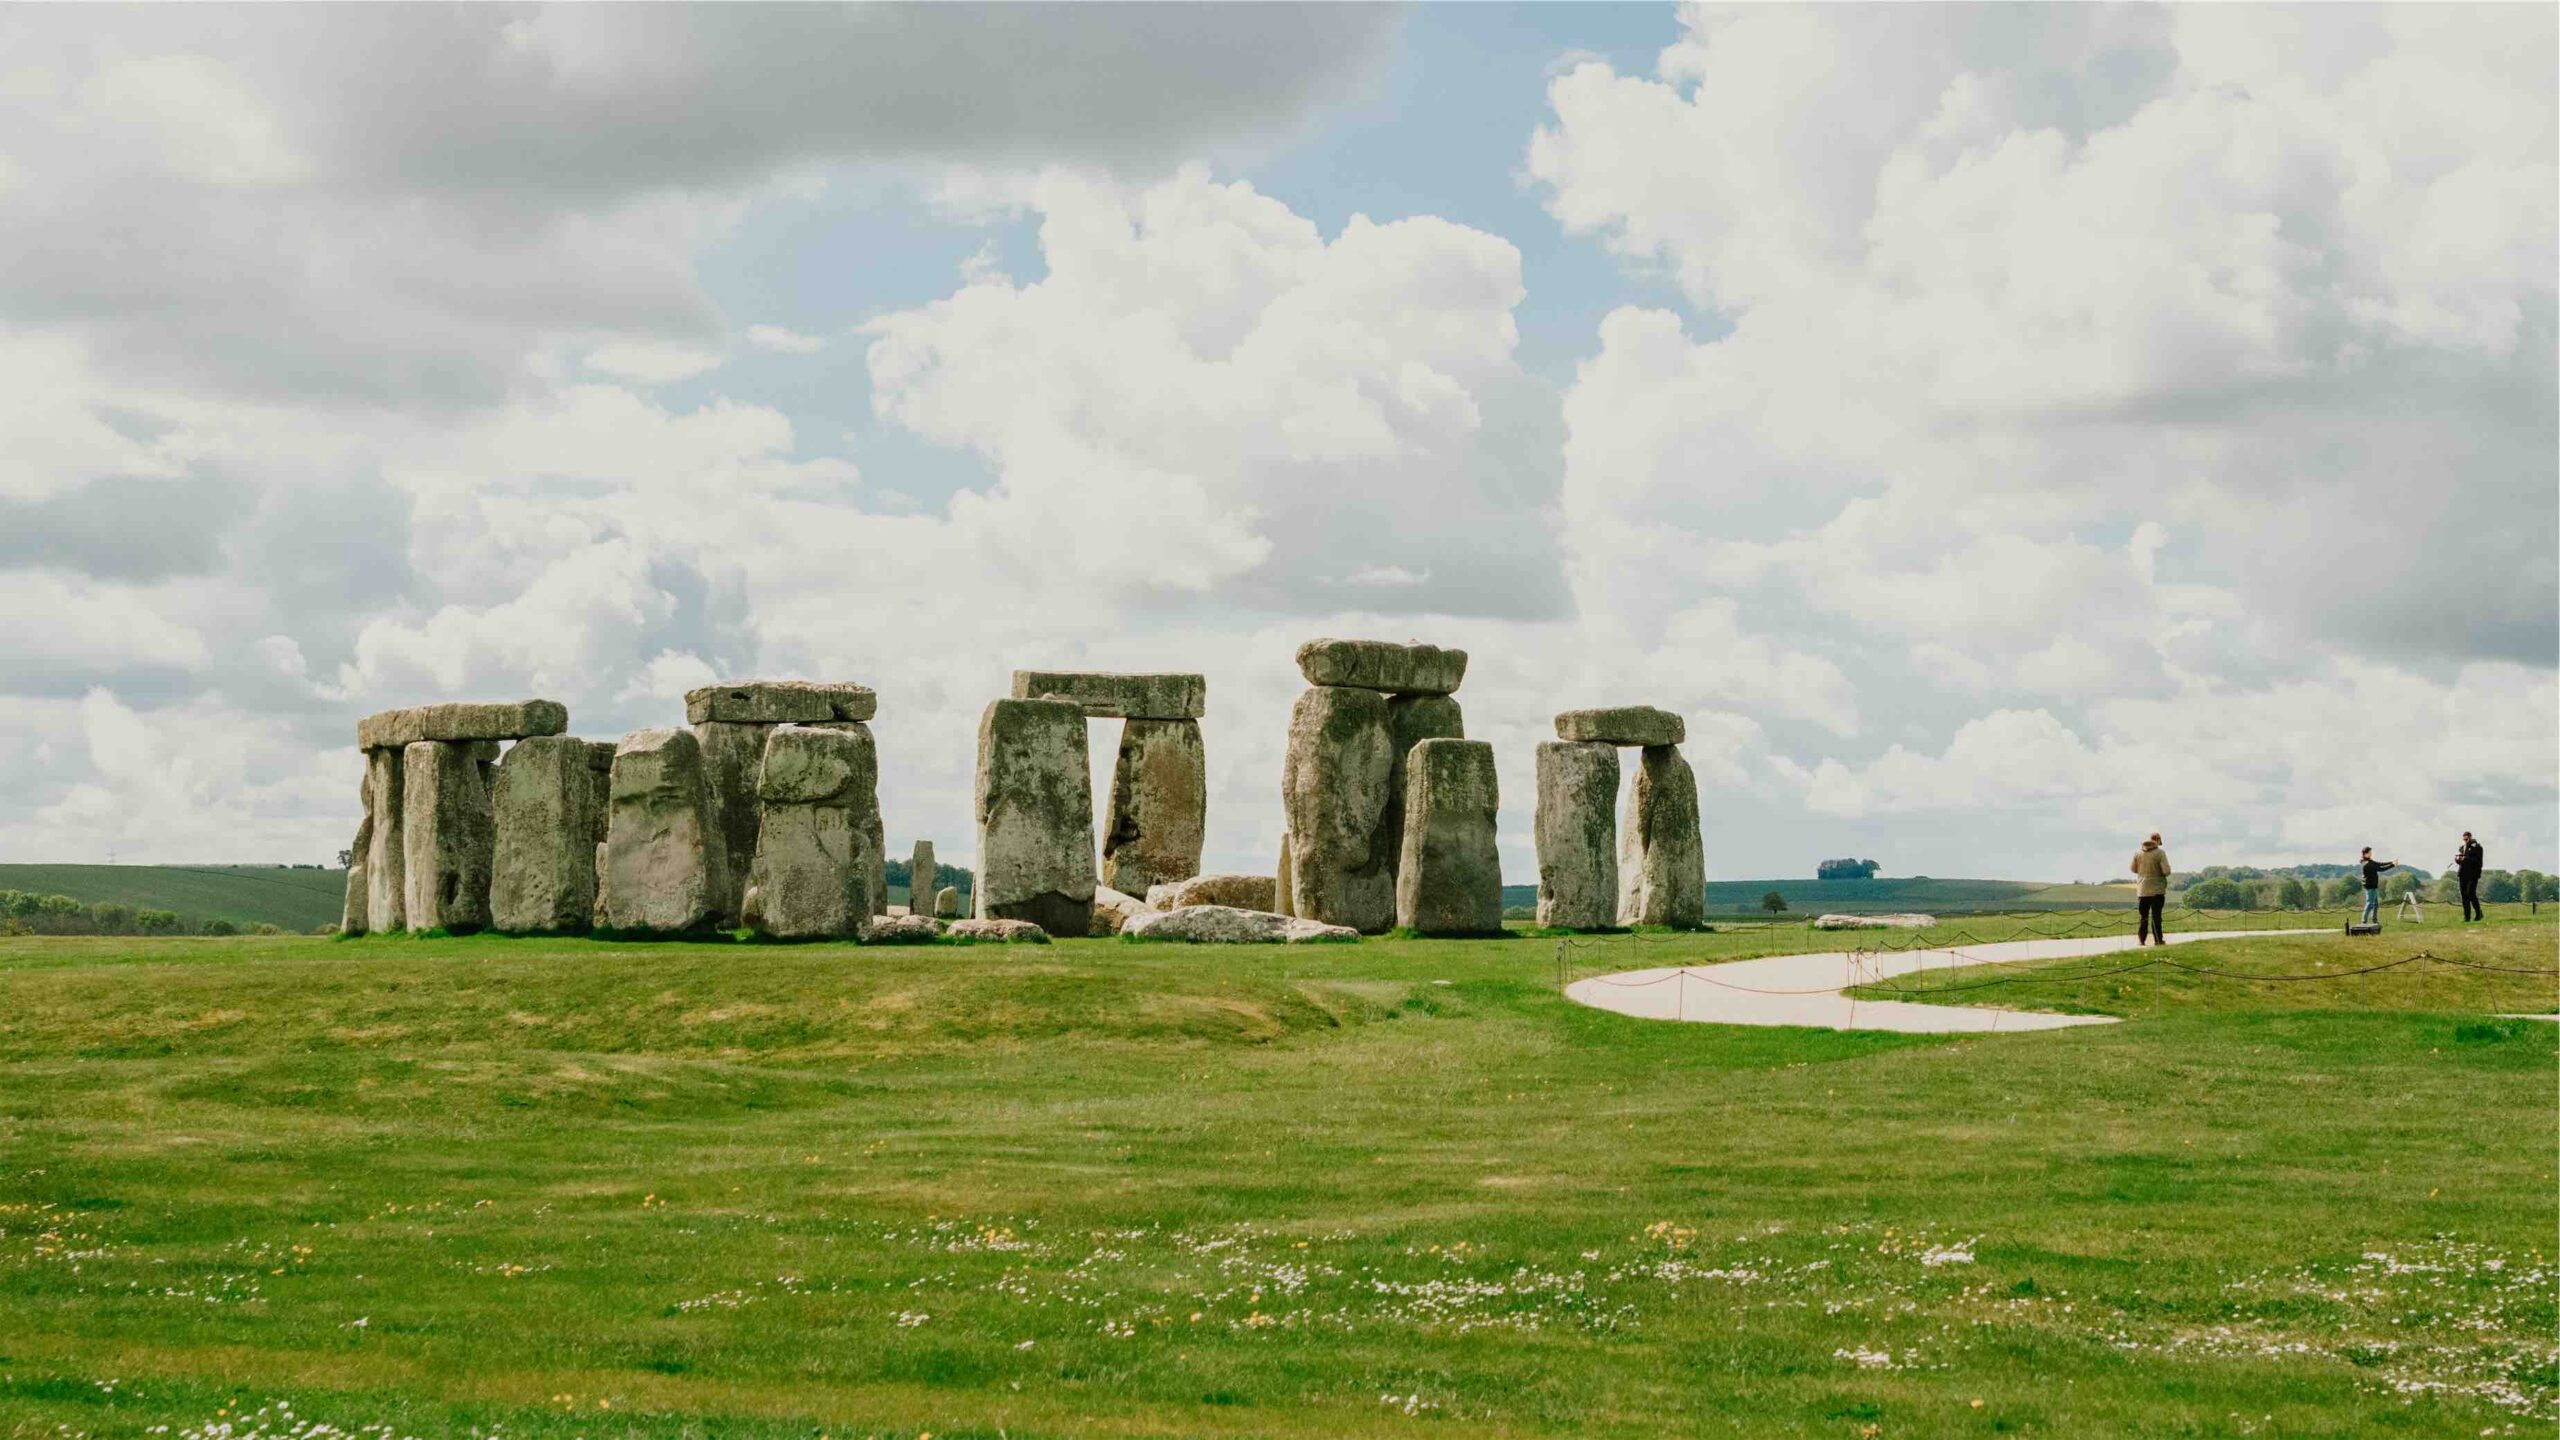 UNESCO site Stonehenge on a cloudy day with minimal people in the frame.